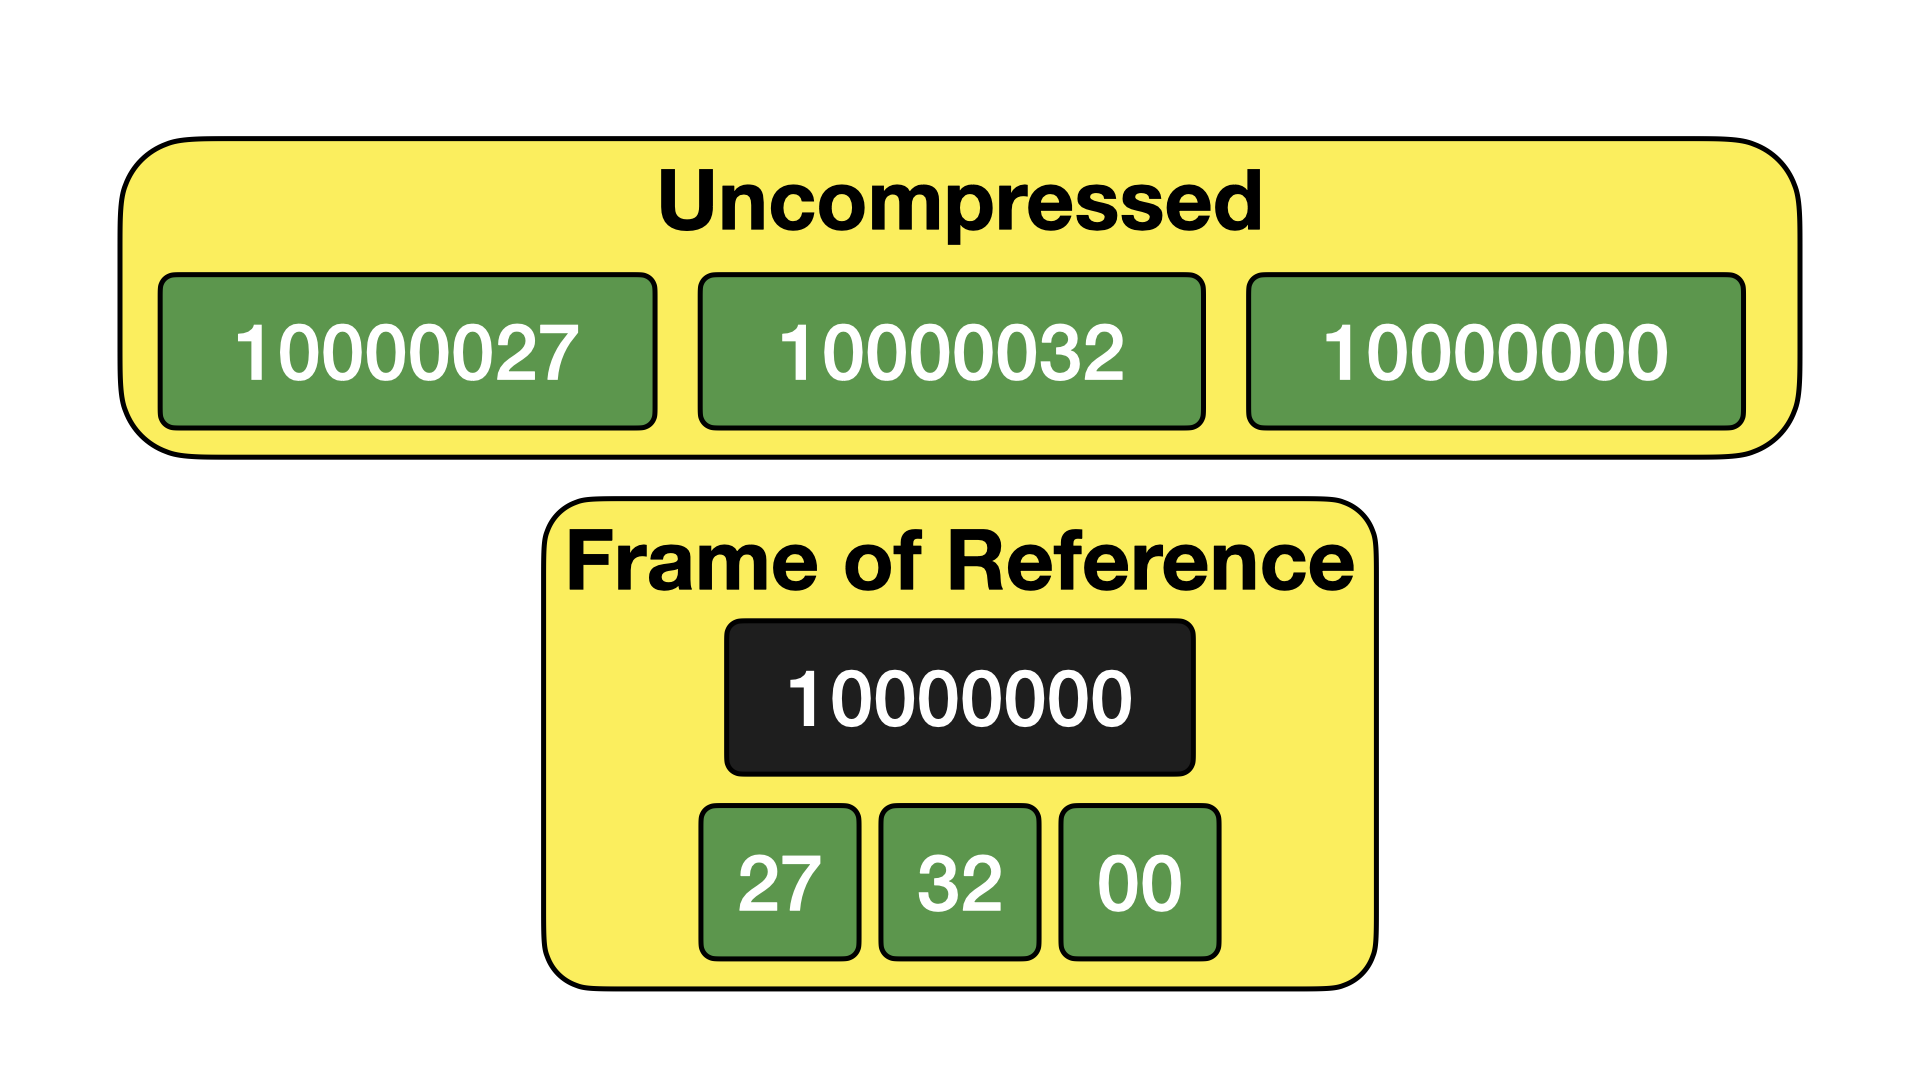 Data set stored both uncompressed and with FOR compression